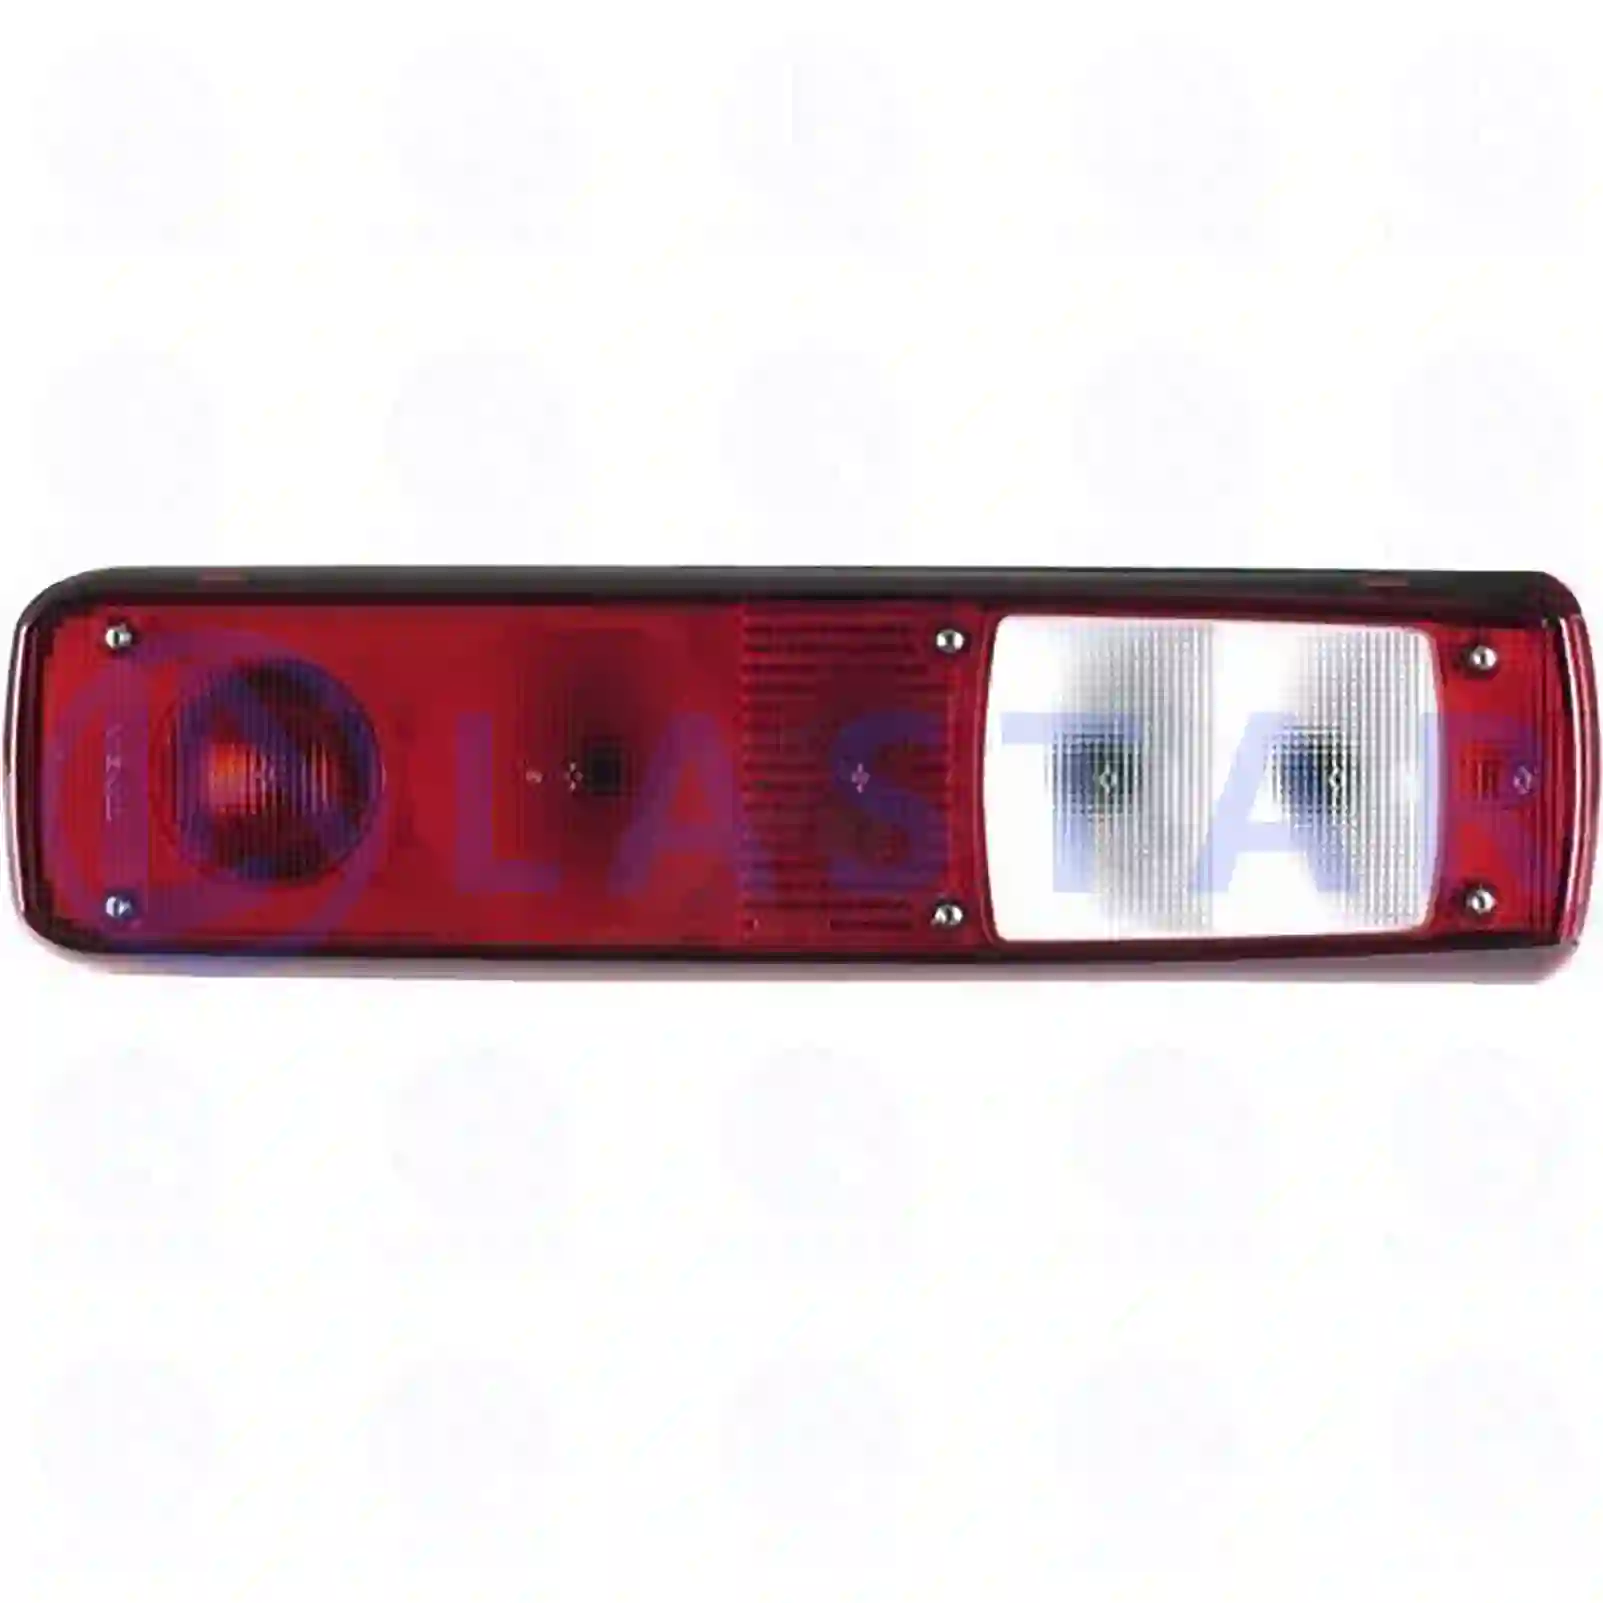 Tail lamp, right, with reverse alarm, 77711043, 7420769777, 7420802353, 20769777, 20802353, ZG21065-0008, ||  77711043 Lastar Spare Part | Truck Spare Parts, Auotomotive Spare Parts Tail lamp, right, with reverse alarm, 77711043, 7420769777, 7420802353, 20769777, 20802353, ZG21065-0008, ||  77711043 Lastar Spare Part | Truck Spare Parts, Auotomotive Spare Parts